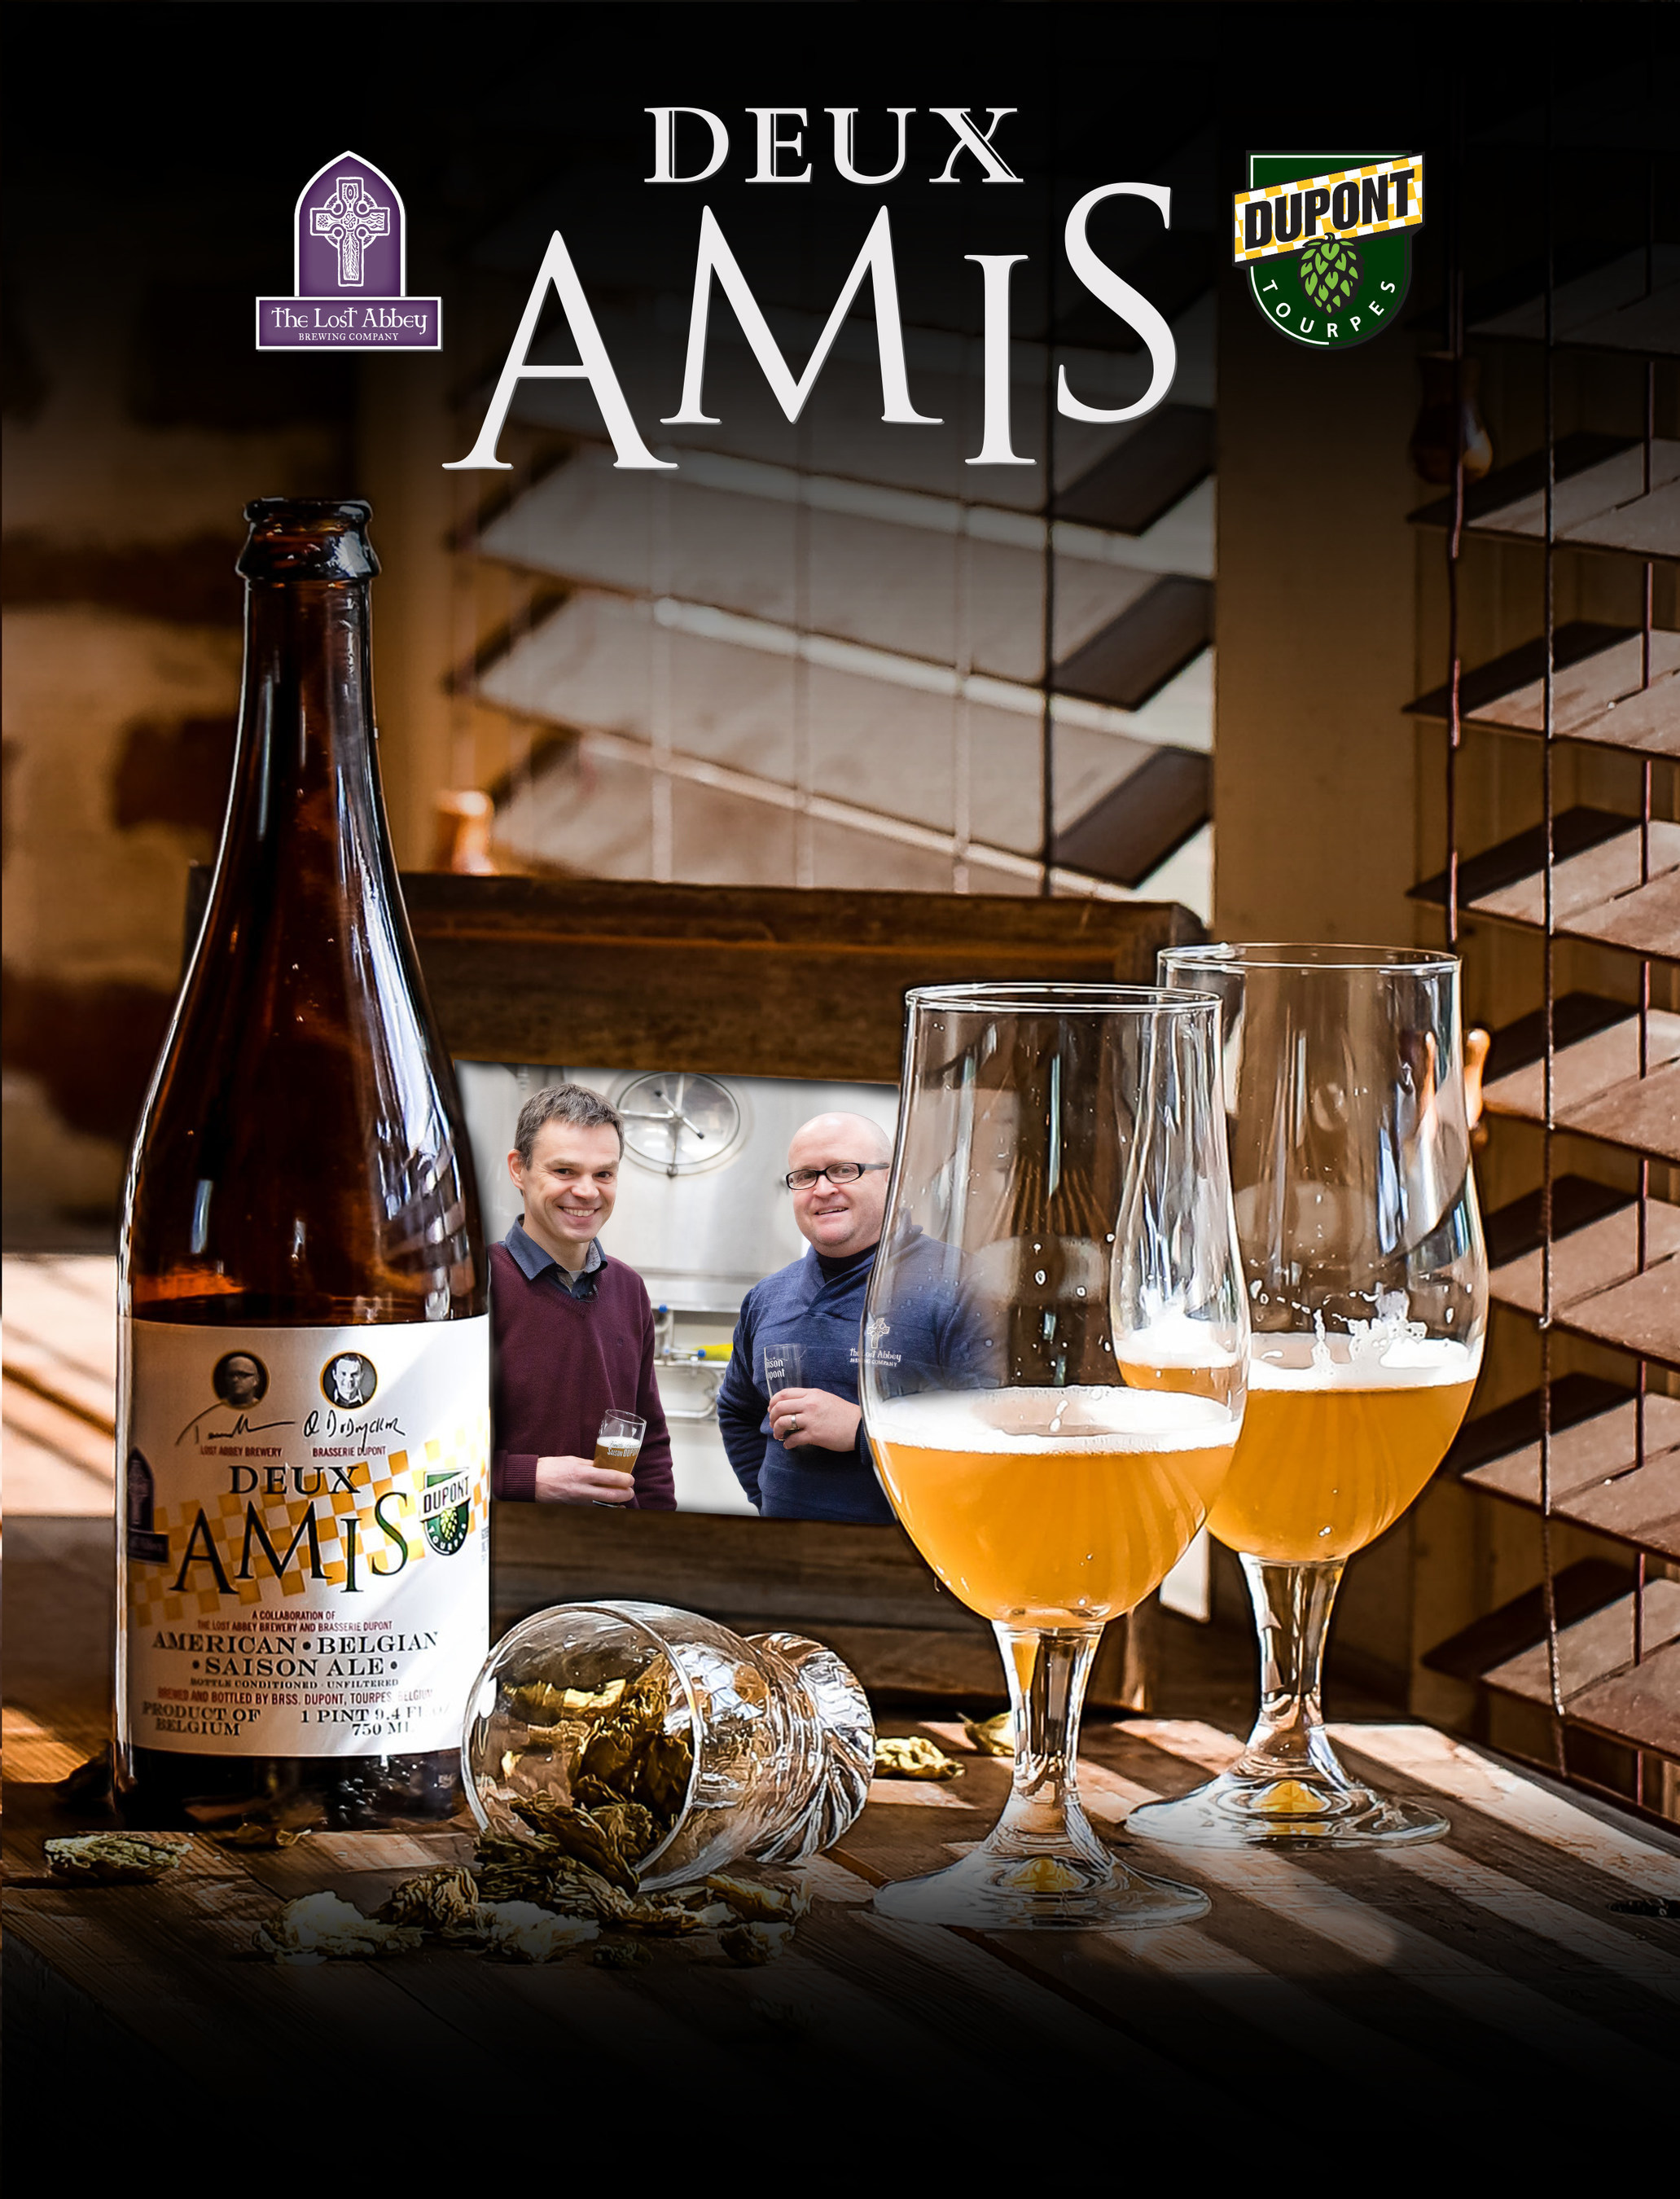 French for "Two Friends," Deux Amis commemorates the landmark collaboration between Belgium's Brewery Dupont and America's Lost Abbey Brewery.